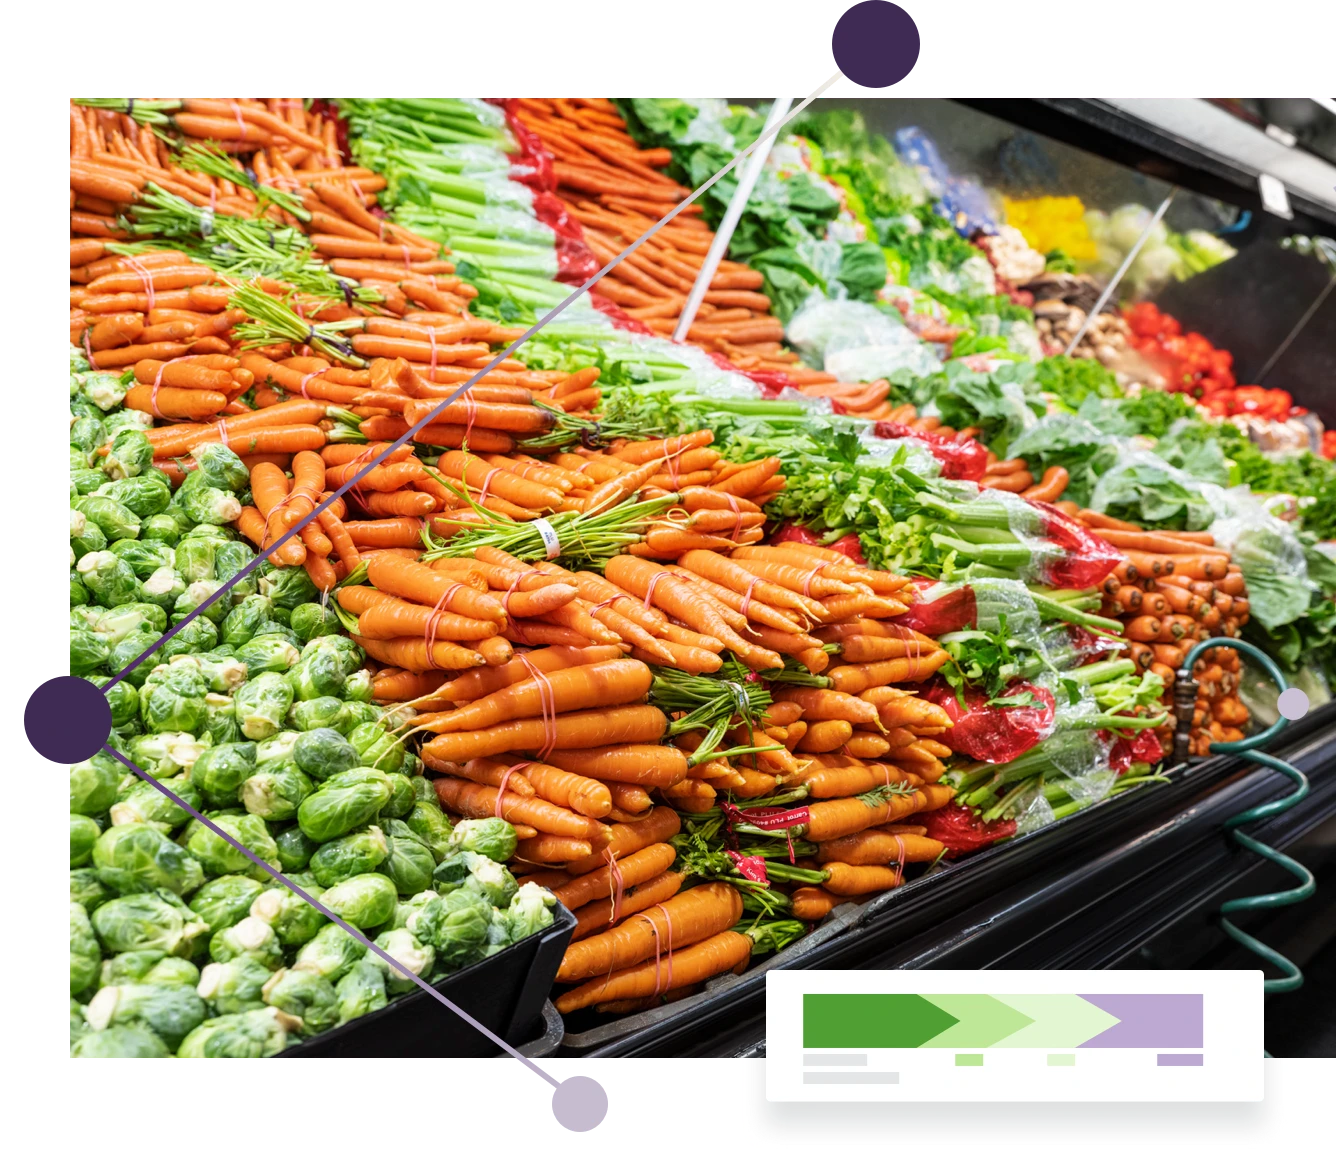 A display of vegetables in a grocery store.